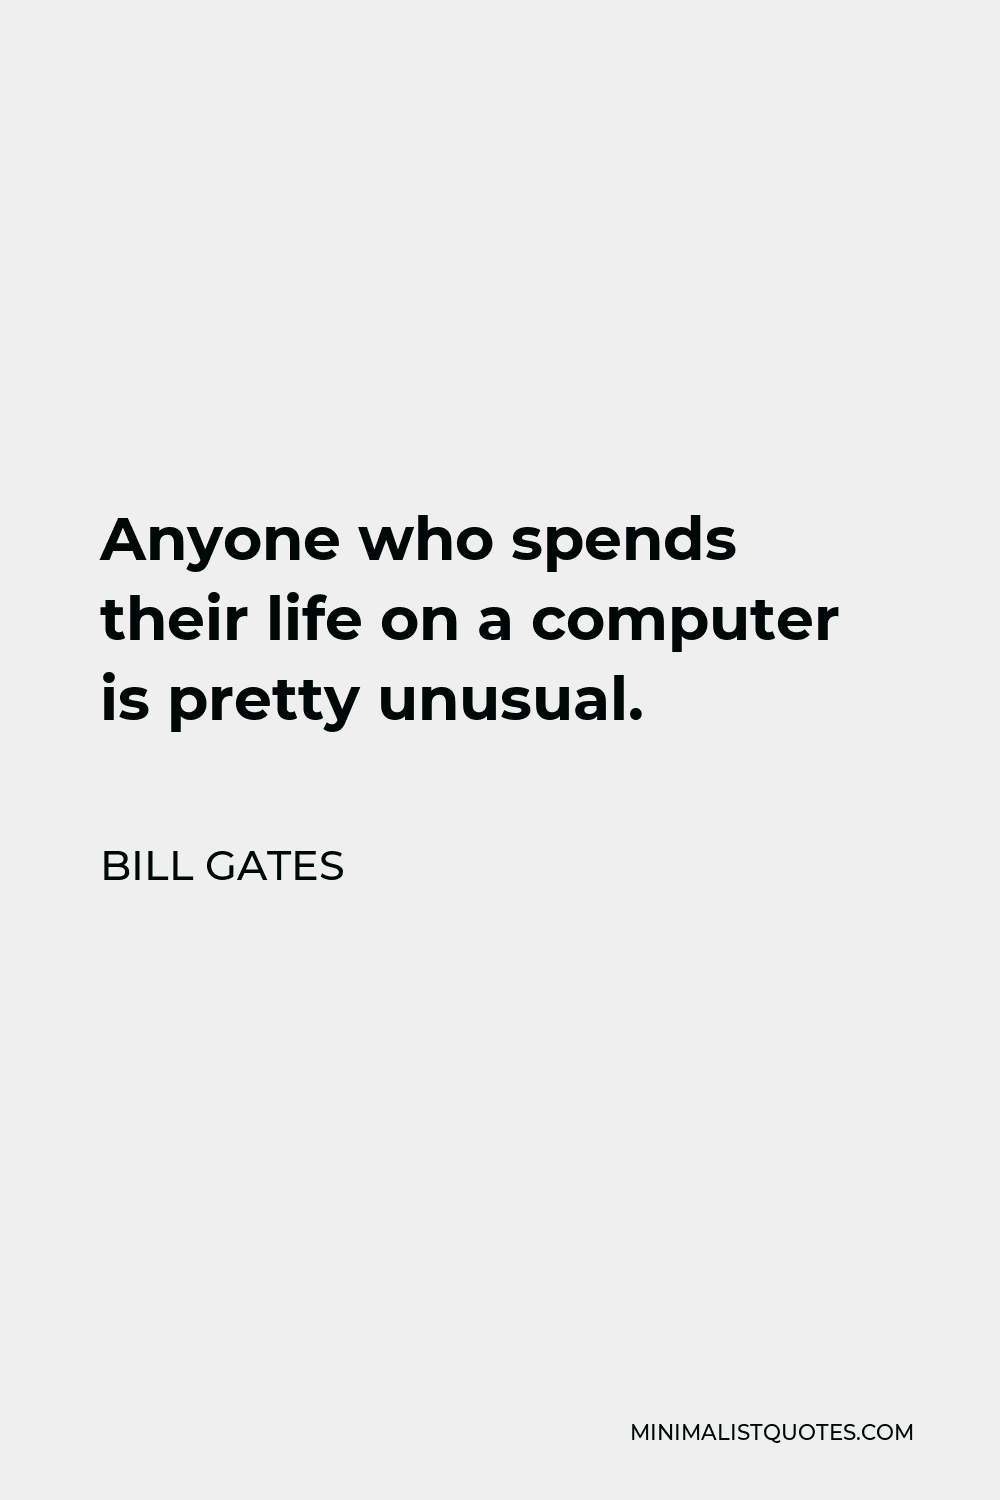 Bill Gates Quote - Anyone who spends their life on a computer is pretty unusual.